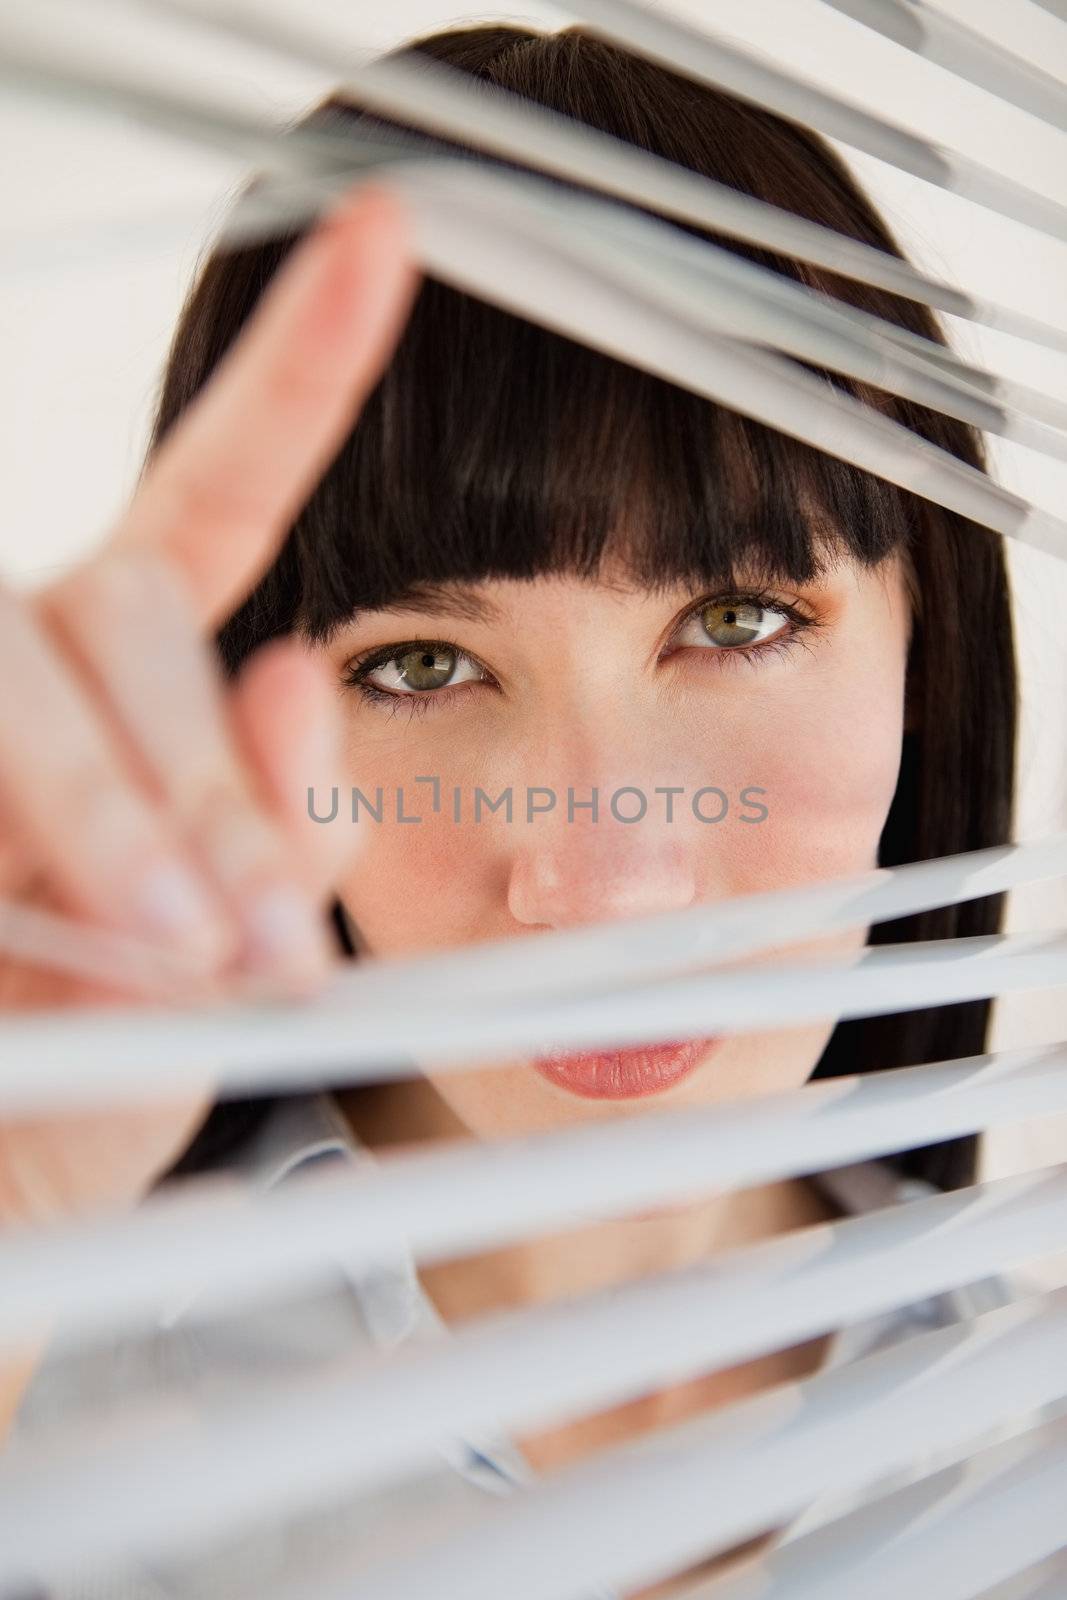 A woman looking through some blinds into the camera by Wavebreakmedia